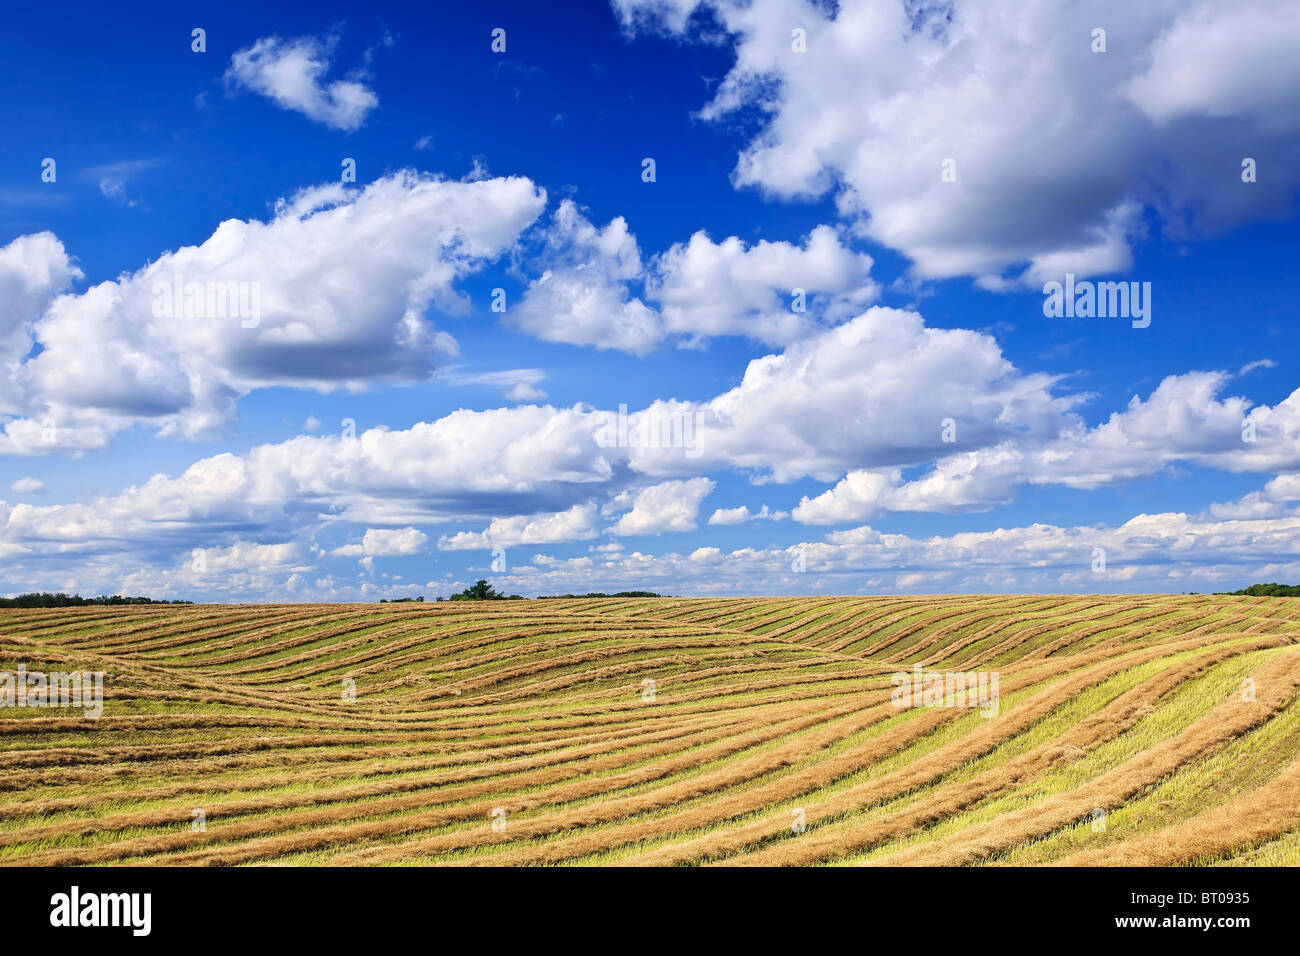 Rows of harvested wheat and cumulus clouds on Canadian Prairie. Tiger Hills, Manitoba, Canada. Stock Photo